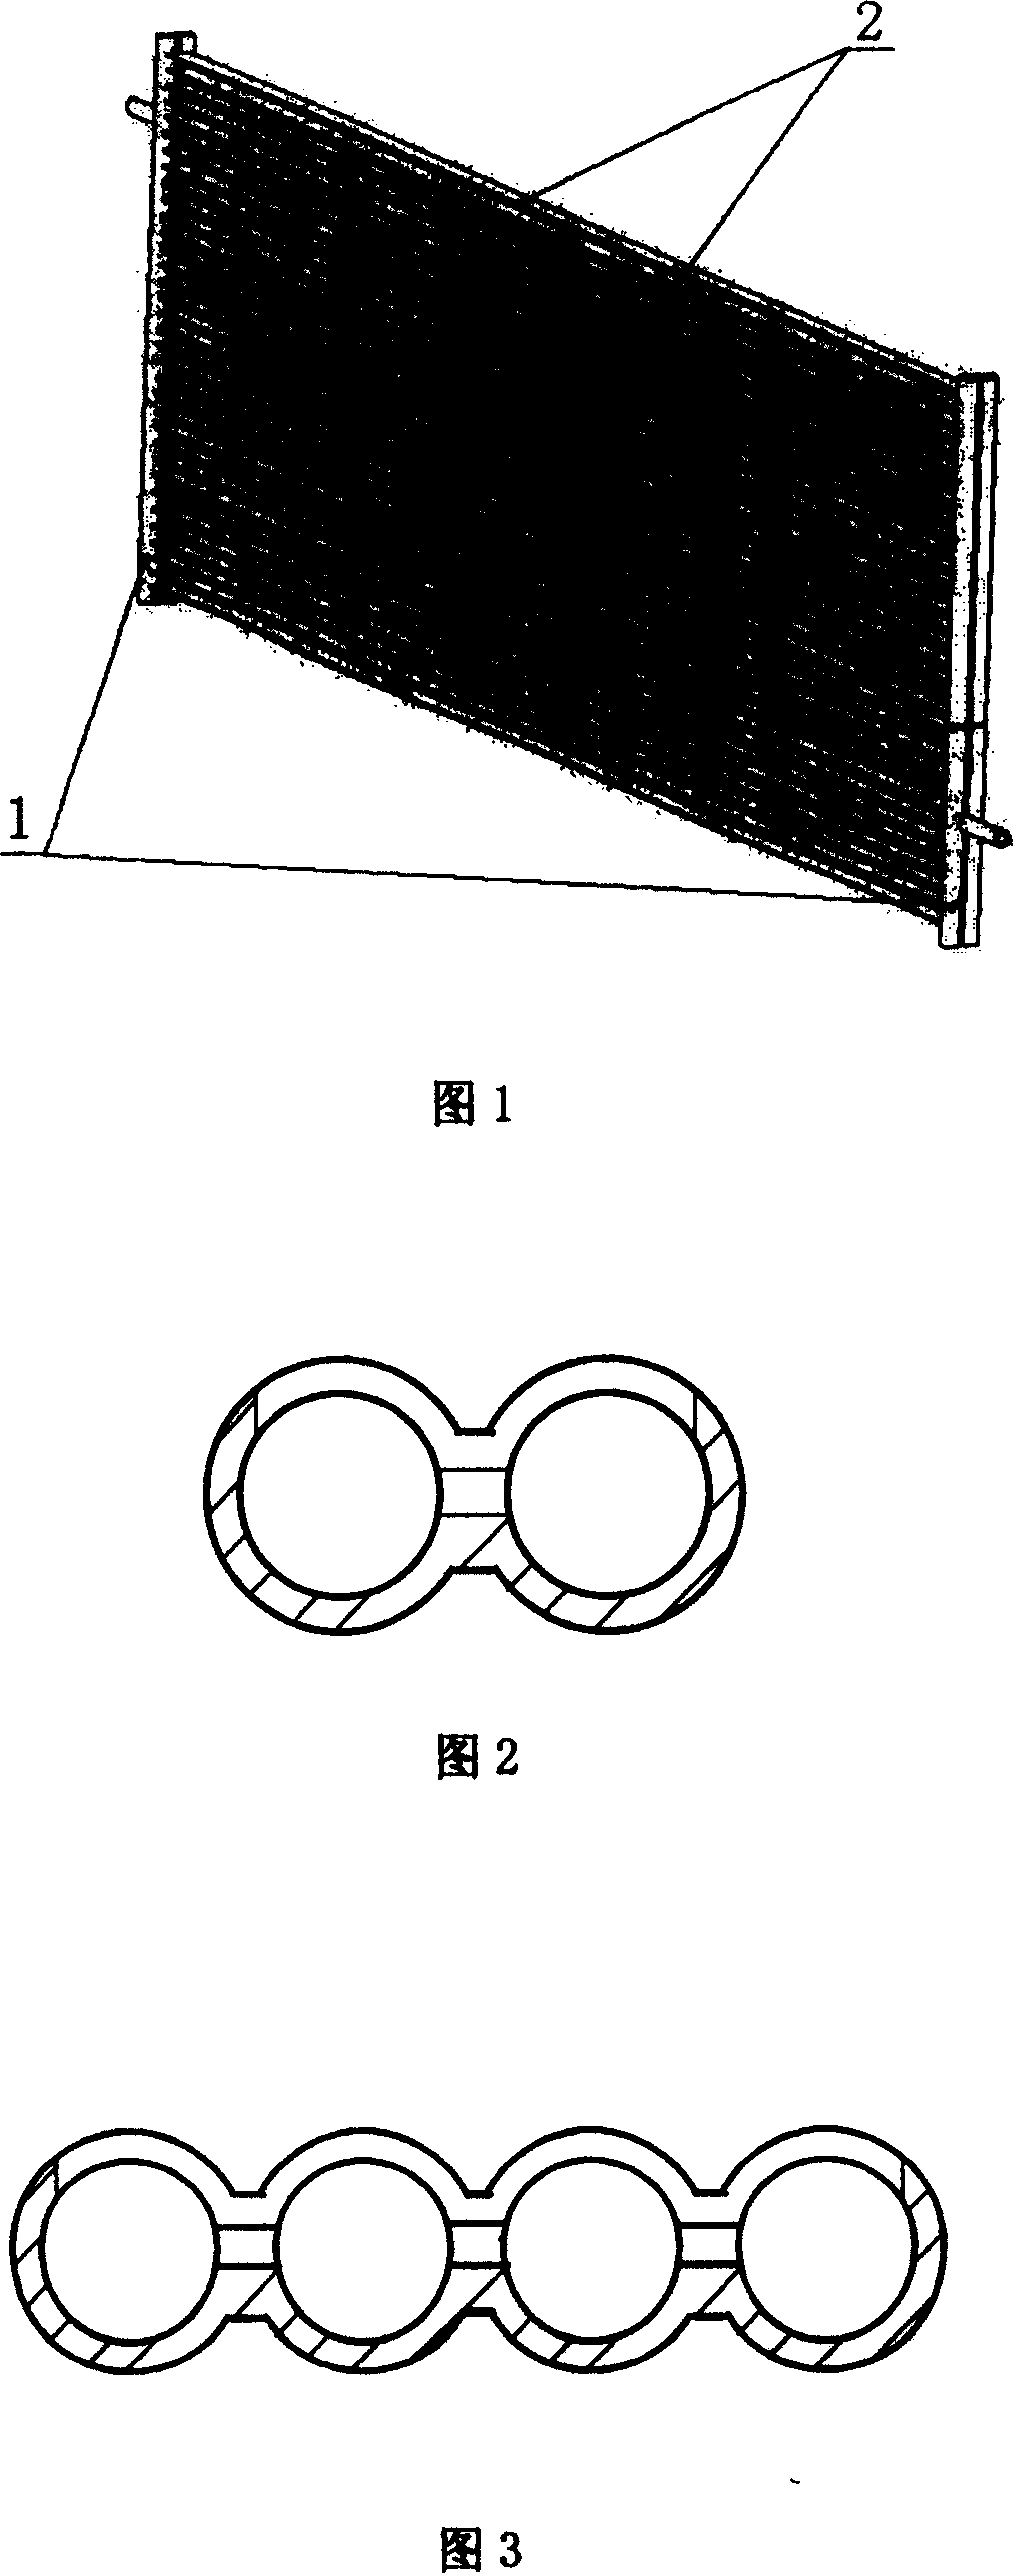 Micro-path parallel current heat-exchanger for transcritical Co2 circulation and mfg. method